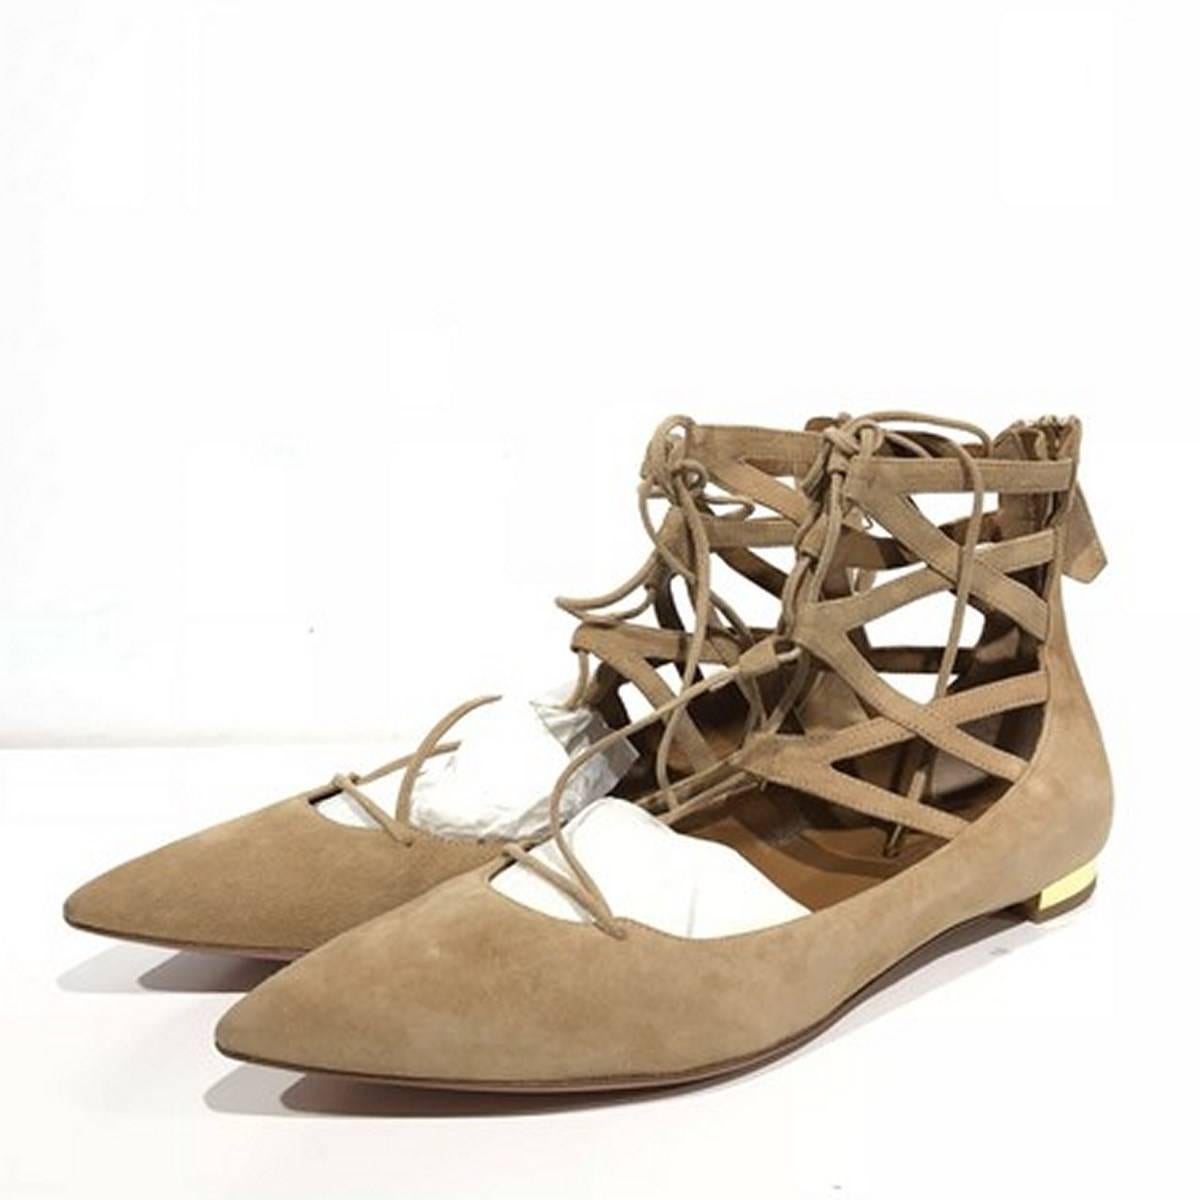 Aquazzura Nude Belgravia Suede Leather Flats (Size - EU 39)

Brand new condition with box, and dust bags. 
Suede leather in nude.  
Size: 39 EU / US 9. 
Made in Italy. 